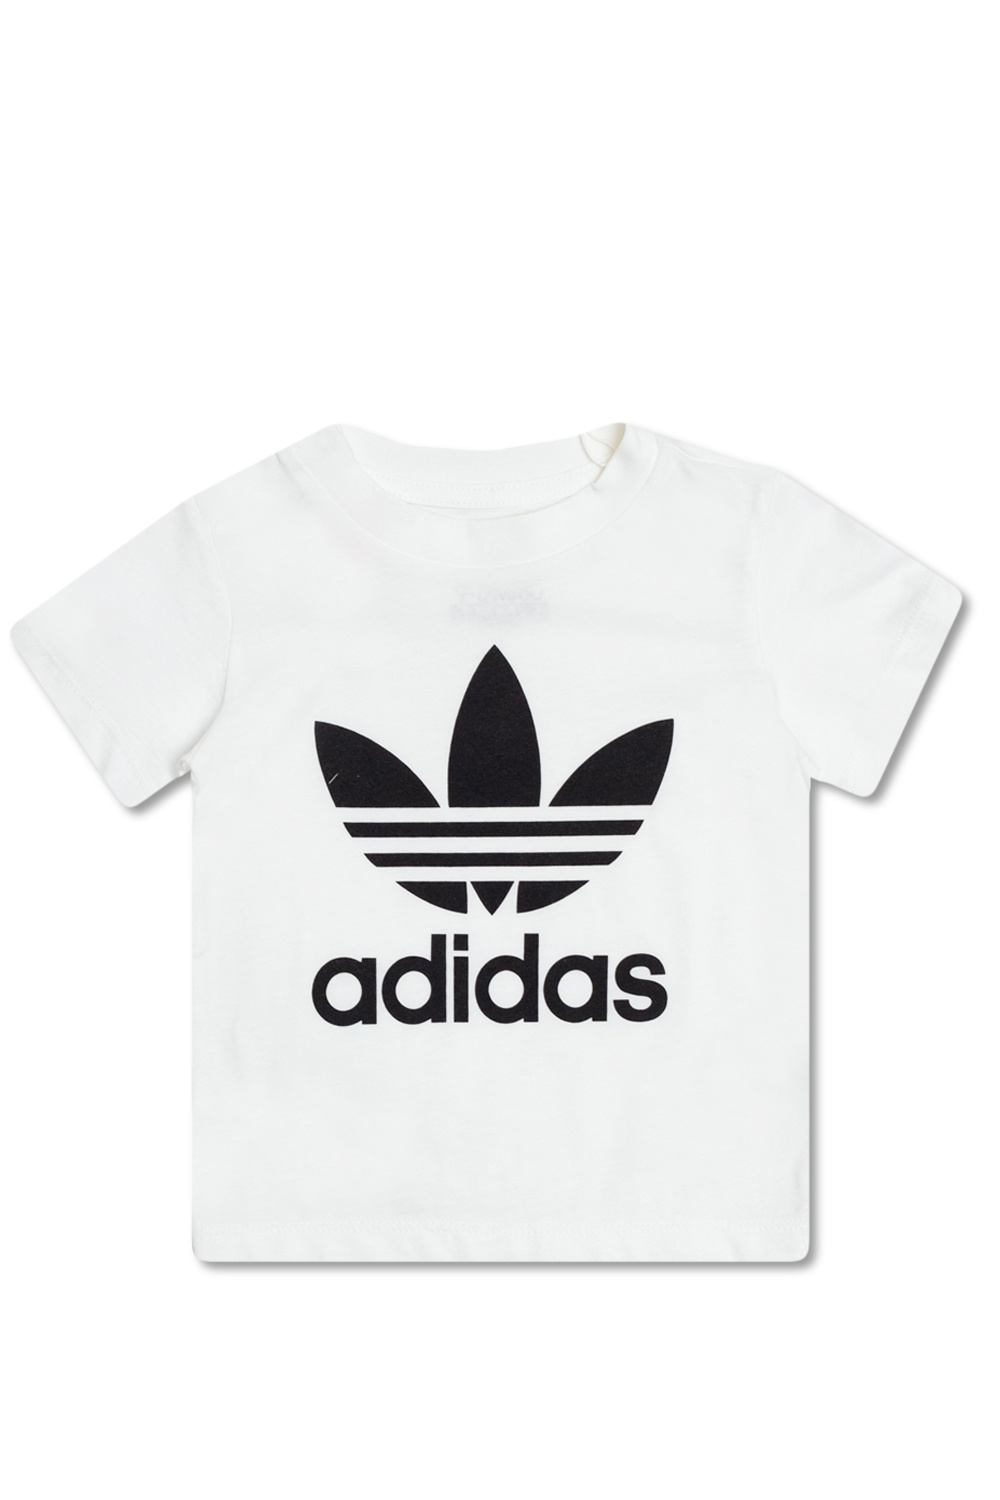 Imperio Inca puerta Gracia adidas femme pharrell williams snapdeal online | 14 years) | ADIDAS femme  Kids adidas femme porter shoe for women outlet clearance - Kids's Boys  clothes (4 | IetpShops